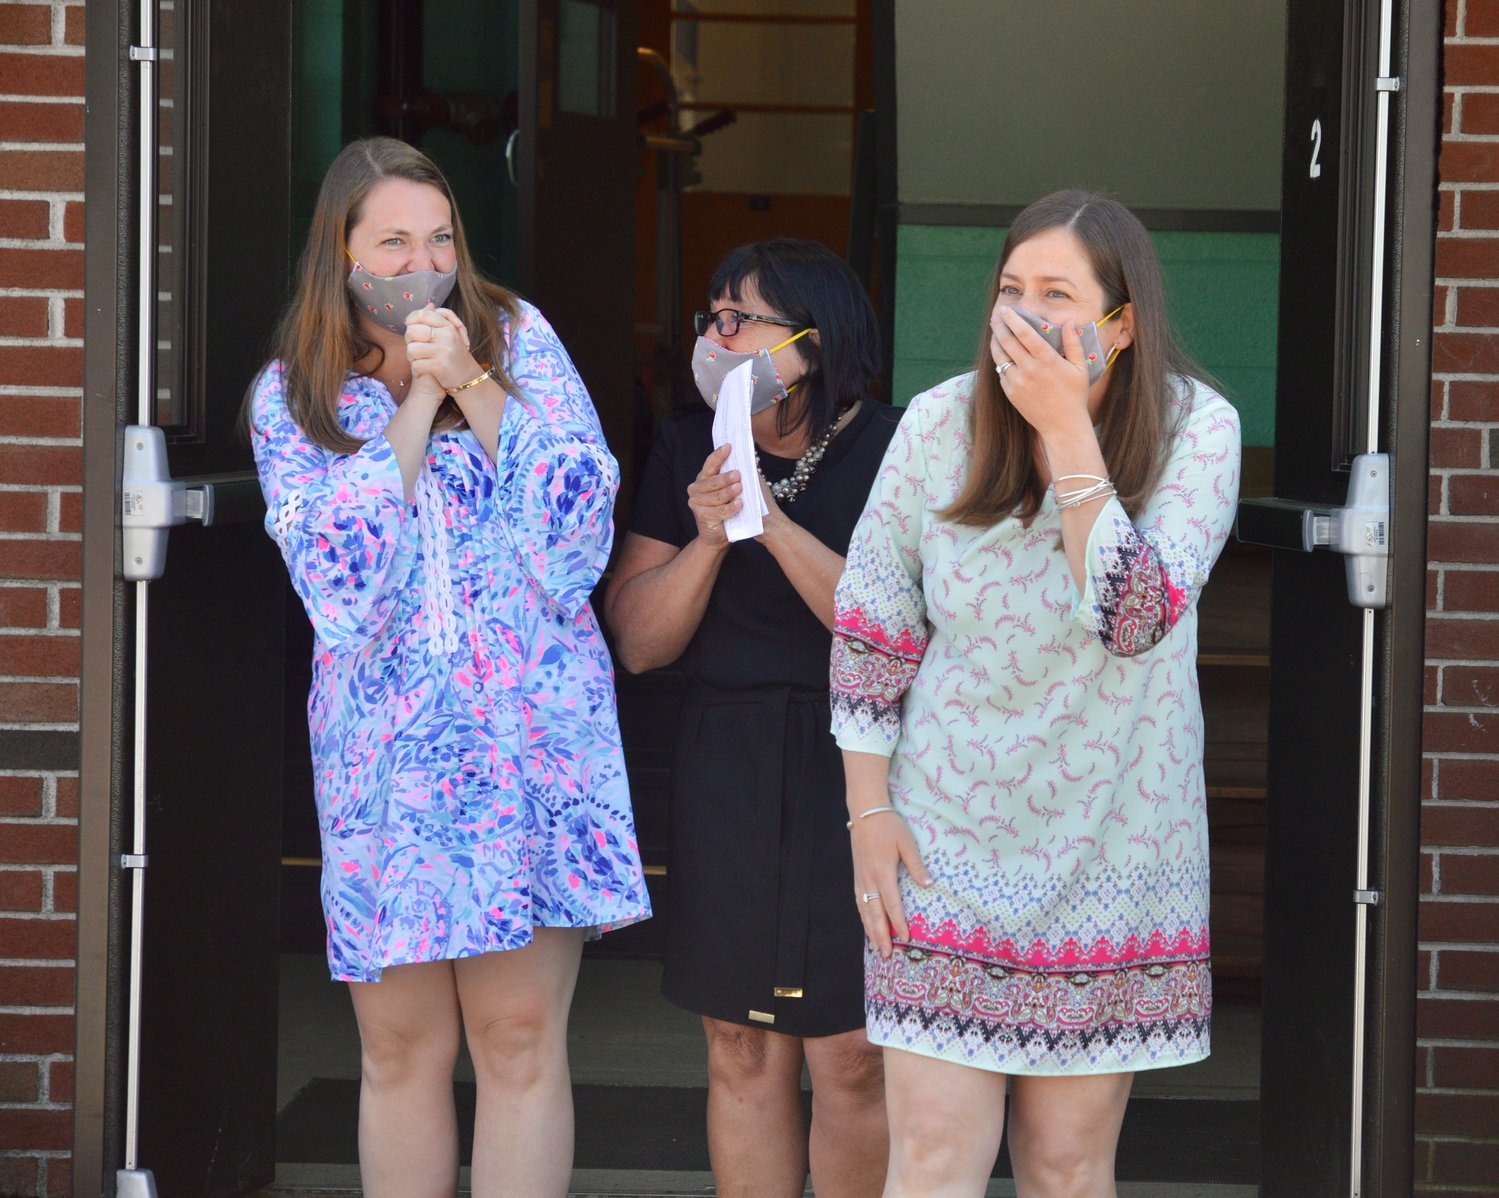 Ashley Adamson (right), a third-grade teacher at Hathaway School, reacts upon seeing a group of people greeting her outside the school during a surprise ceremony honoring her as the 2021 Rhode Island Teacher of the Year. At left is Victoria Travis, who team-teaches with Mrs. Adamson, with Hathaway School Principal Lisa Little in the middle.